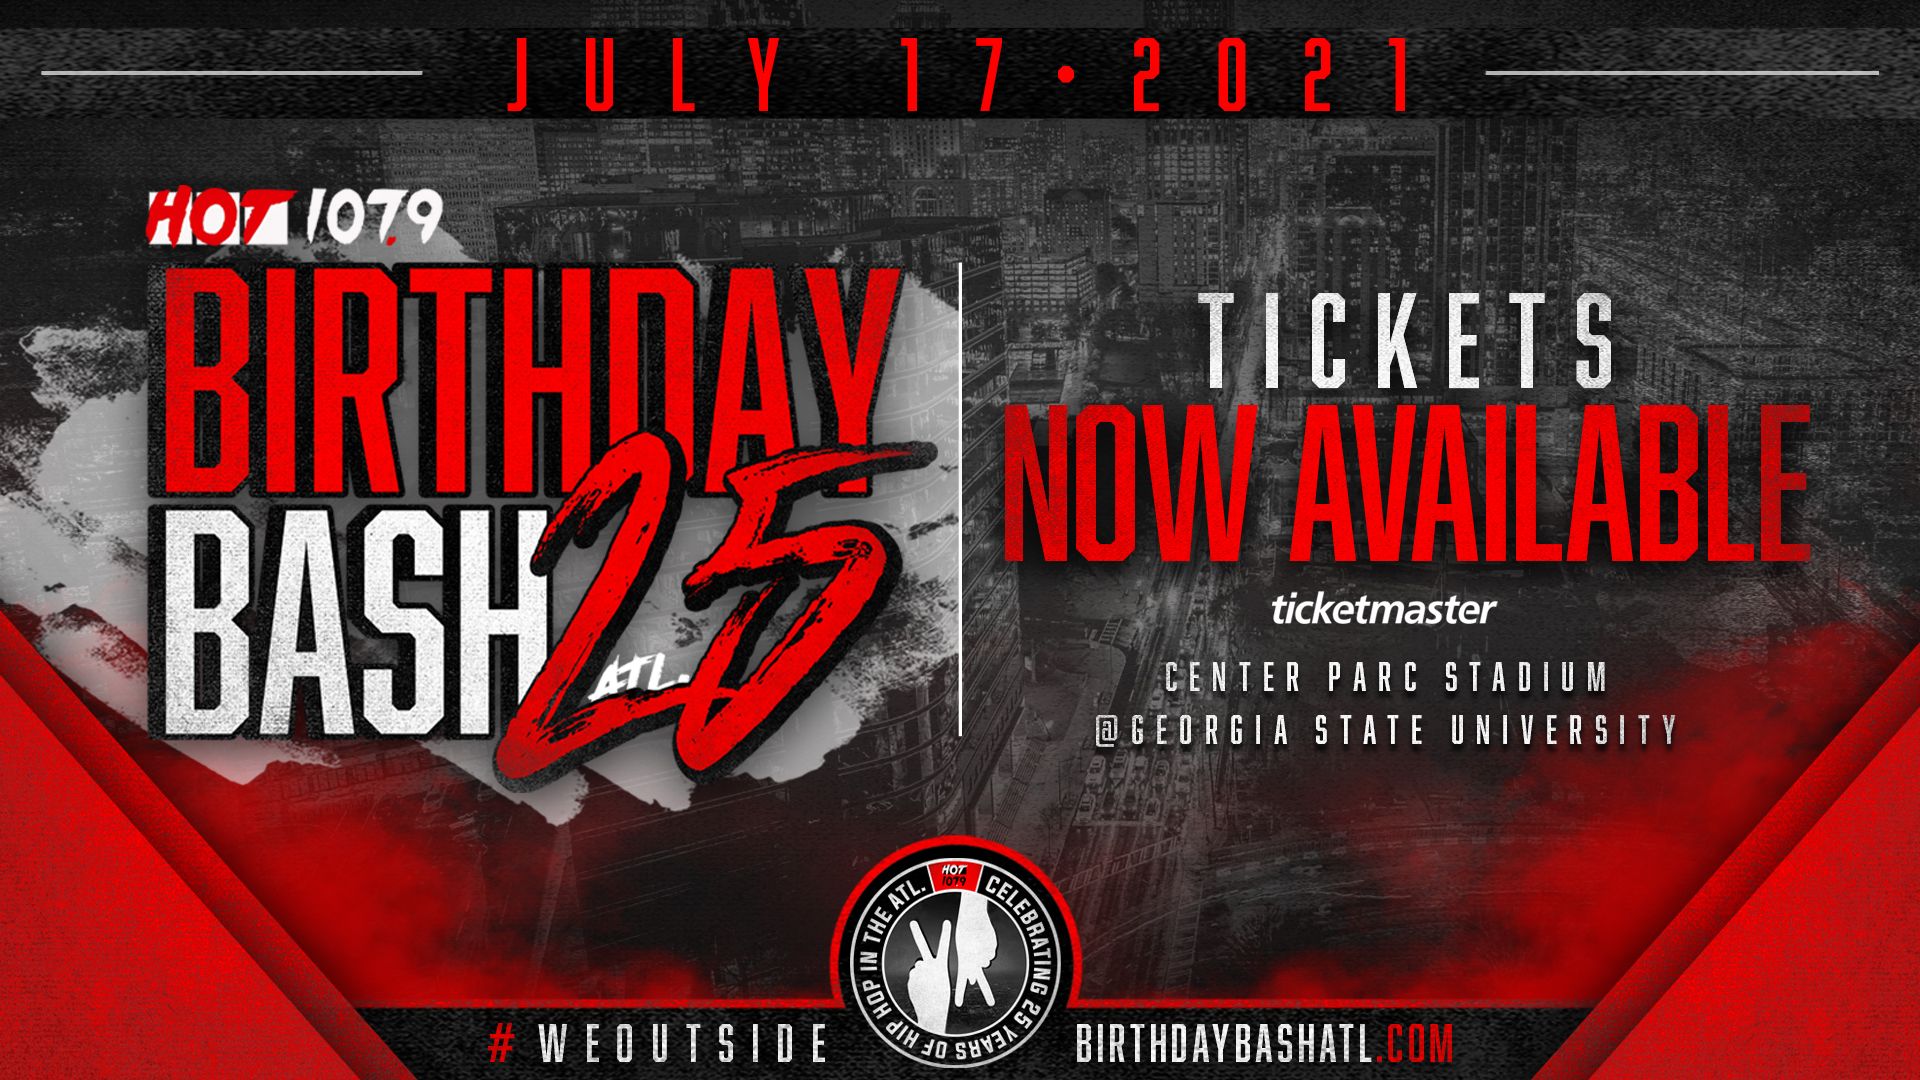 We’ll See You There: Hot 107.9’s Birthday Bash Is Going Down July 17 With Lil Baby, Young Thug, Latto, Pooh Shiesty, Gucci Mane & Many More